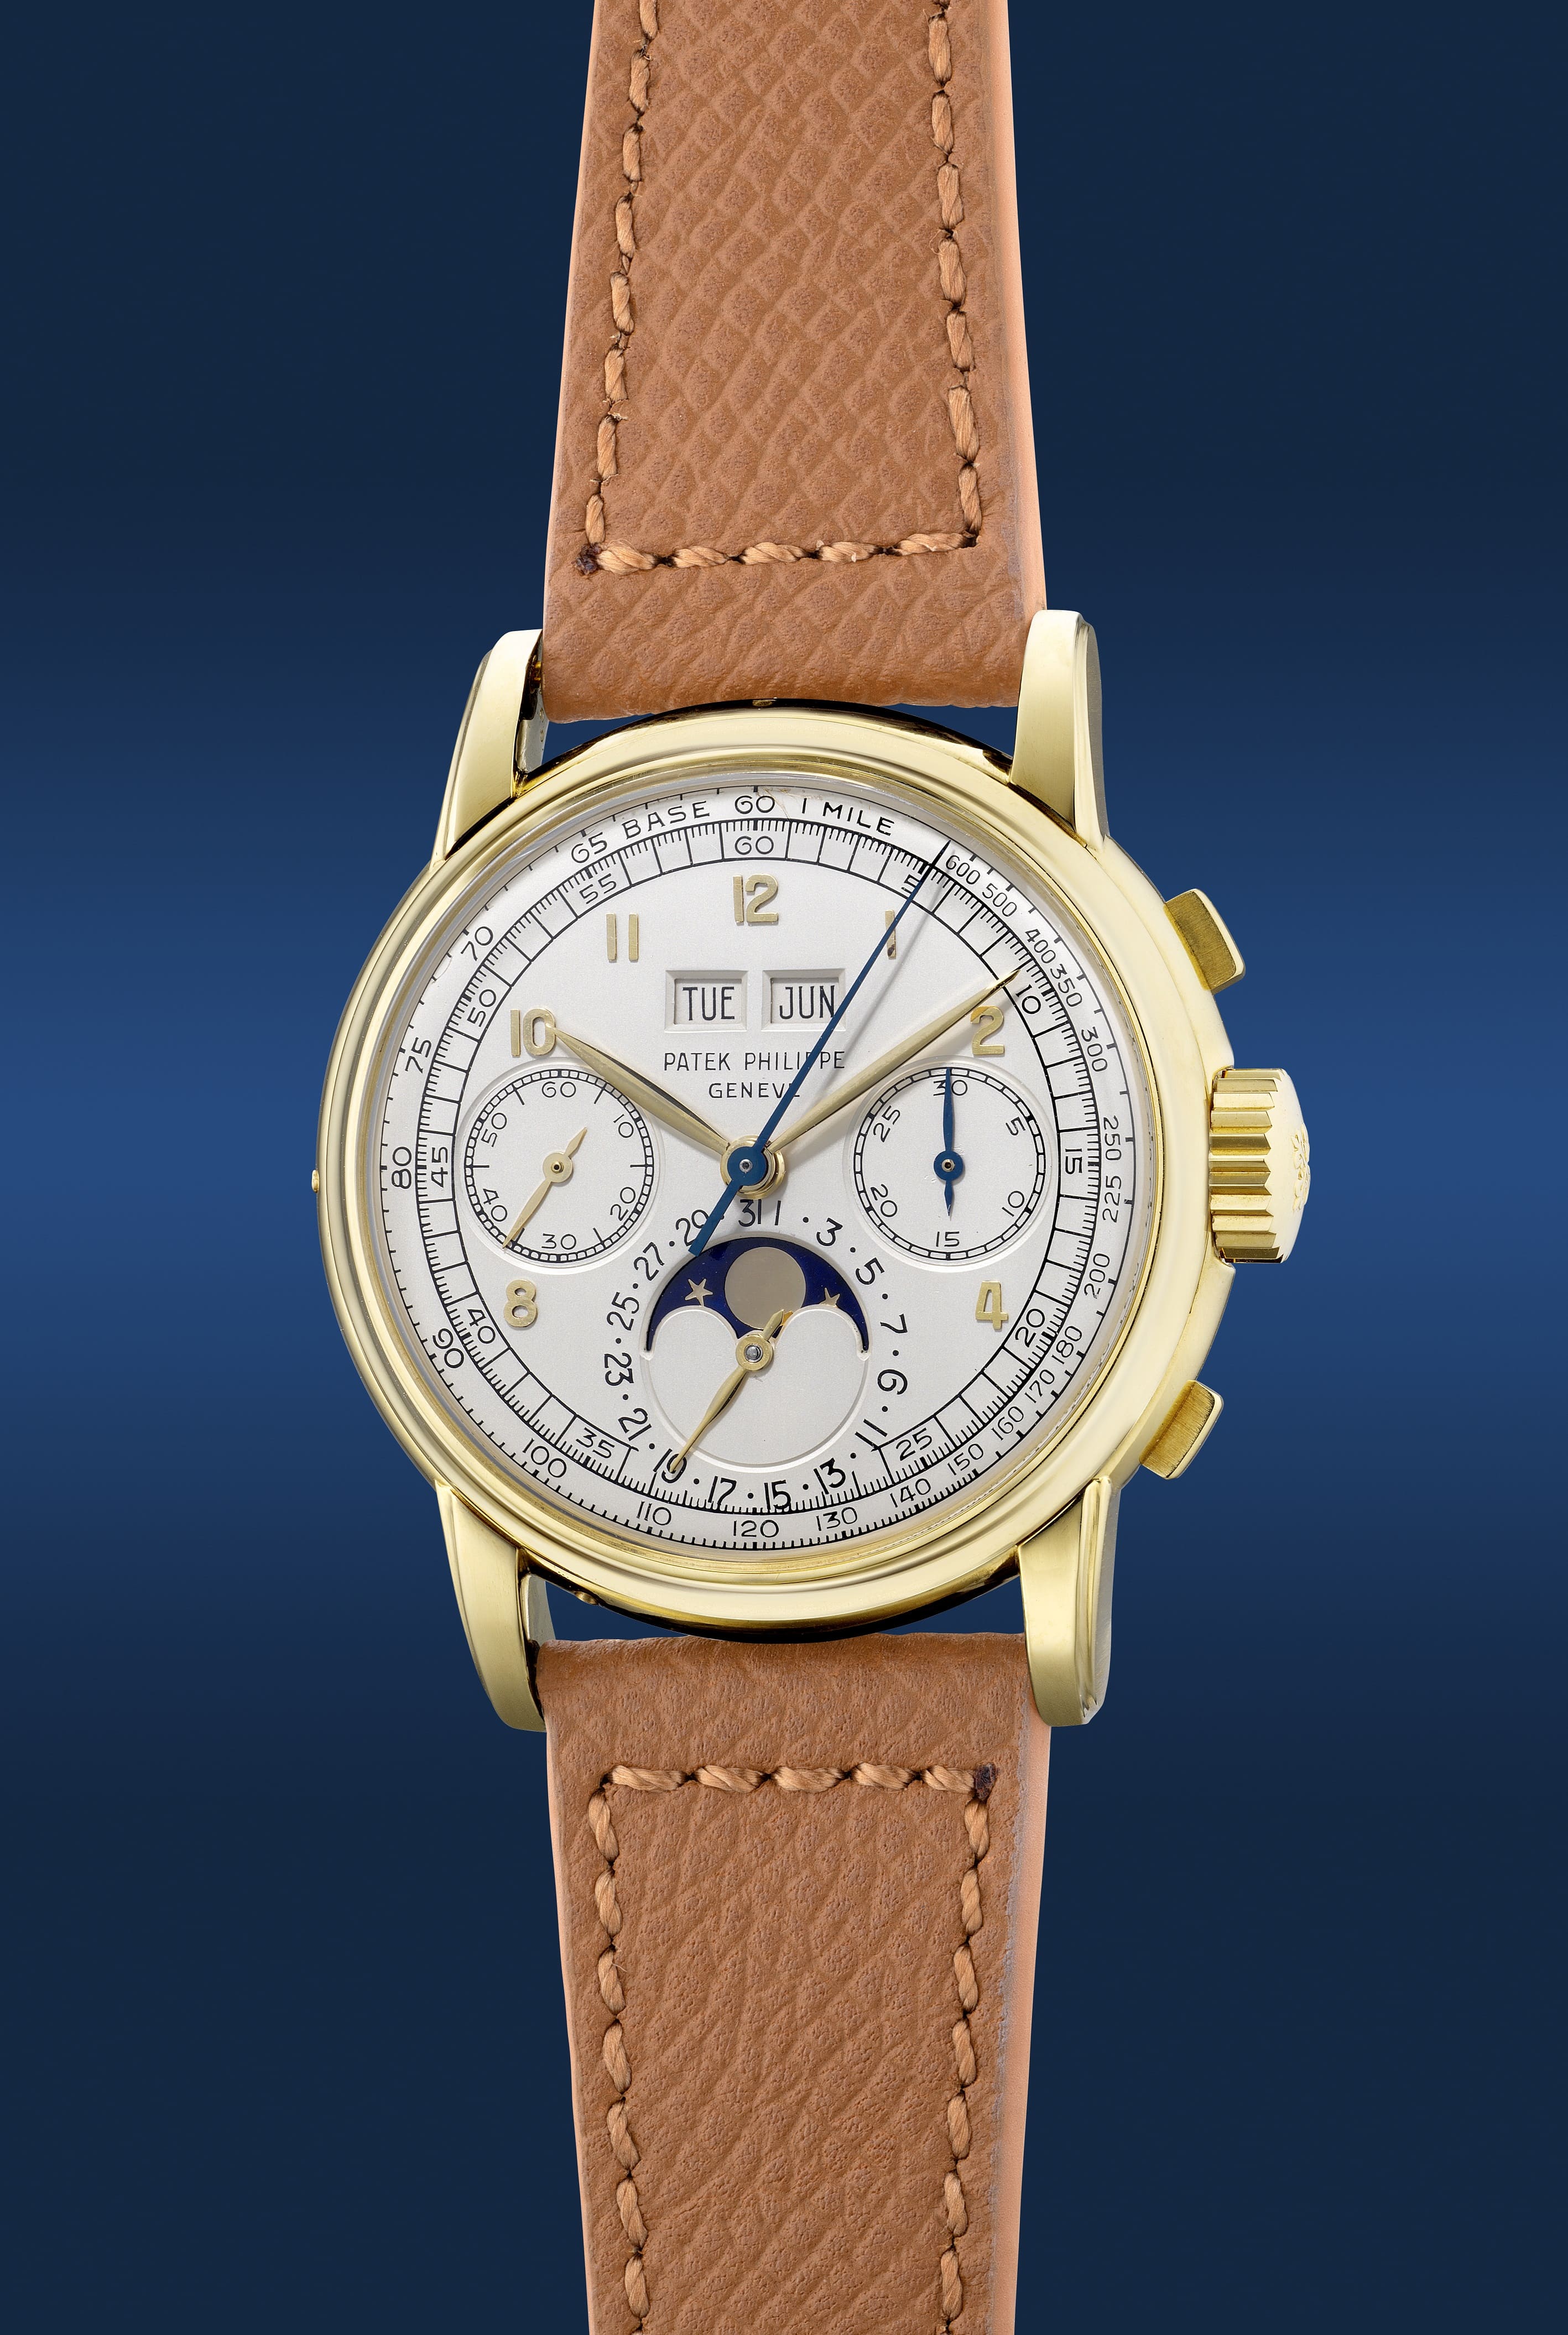 858 Patek Philippe Reference 2499 in yellow gold